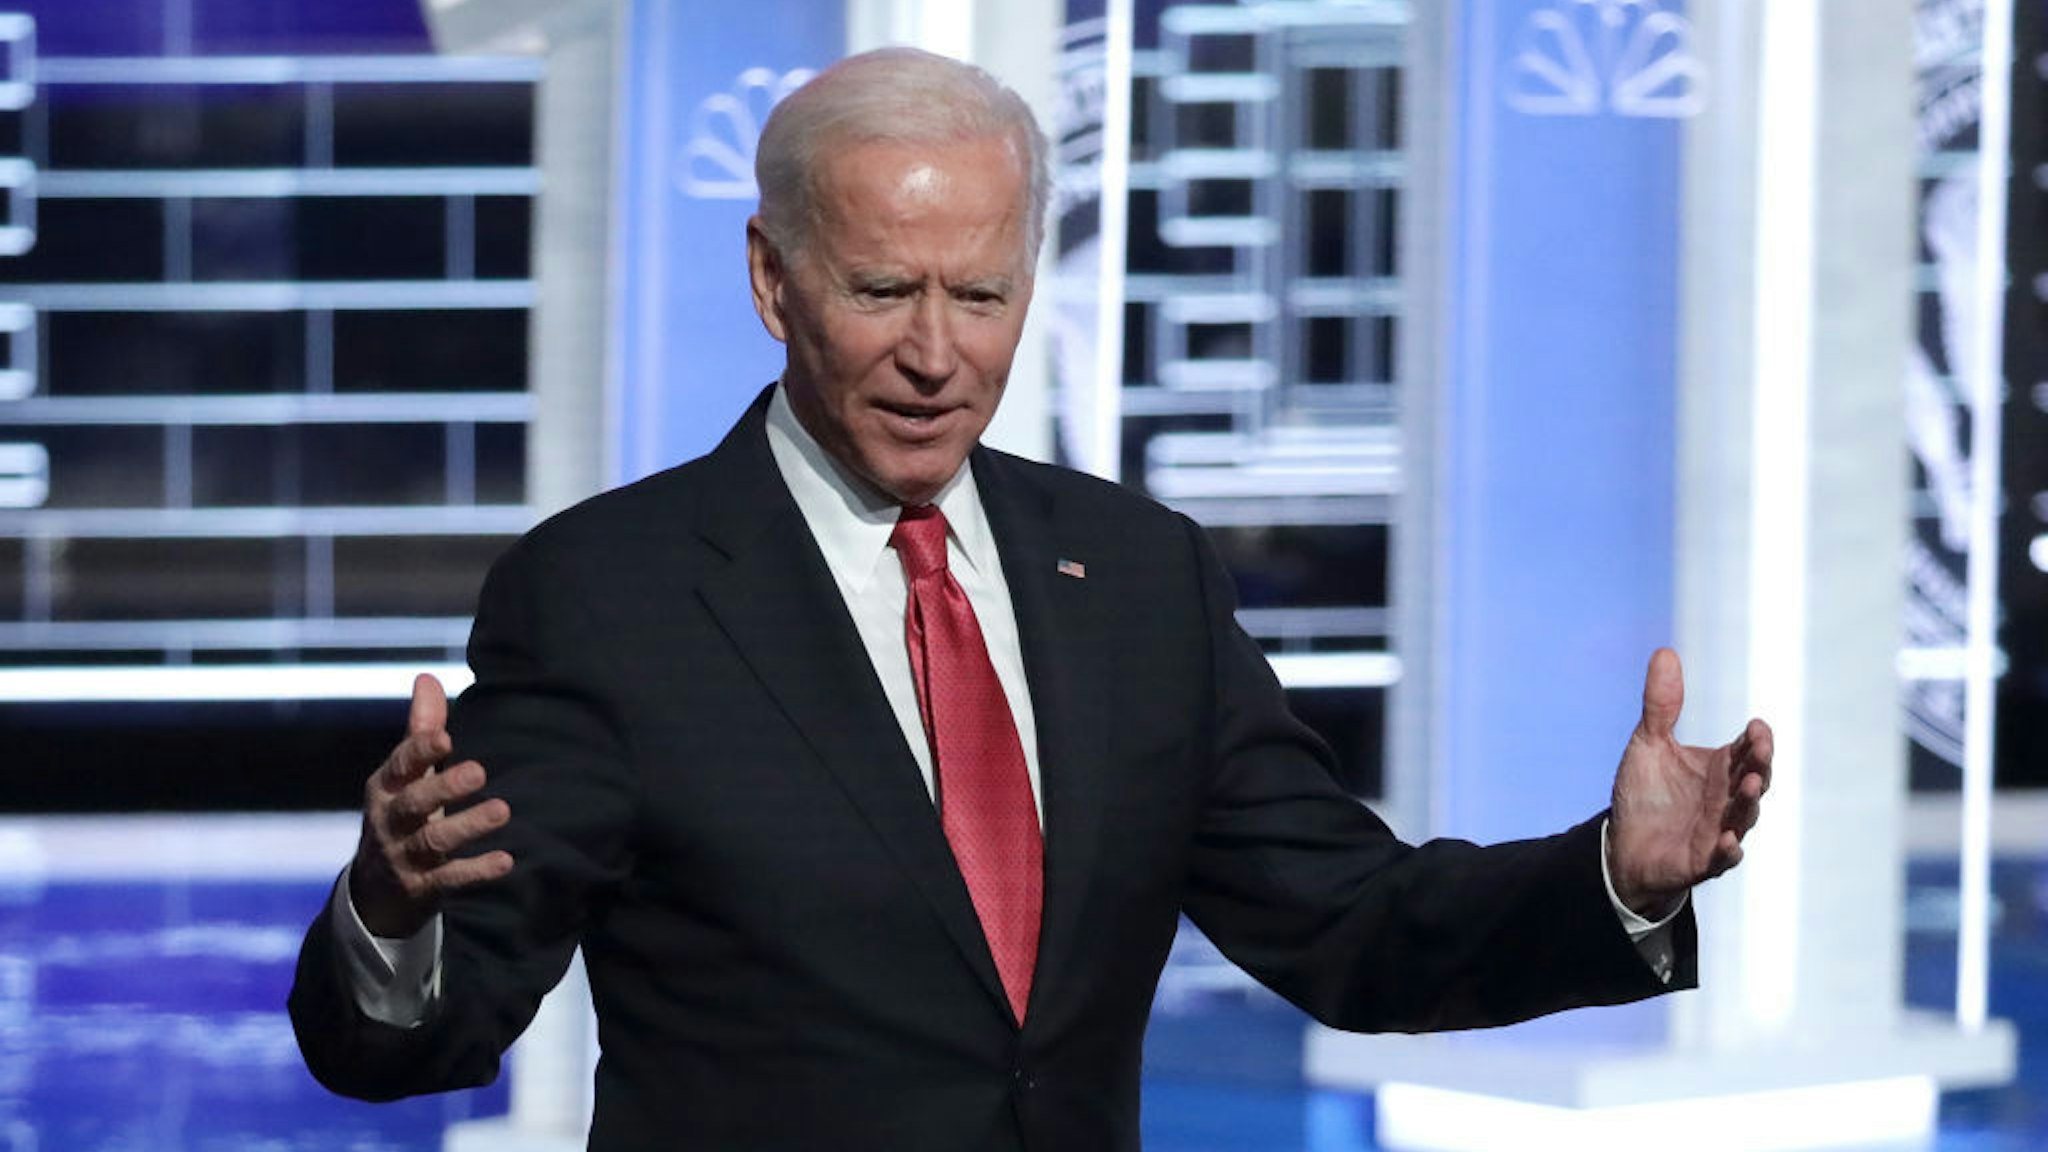 Former Vice President Joe Biden greets the audience after the Democratic Presidential Debate at Tyler Perry Studios November 20, 2019 in Atlanta, Georgia. Ten Democratic presidential hopefuls were chosen from the larger field of candidates to participate in the debate hosted by MSNBC and The Washington Post. (Photo by Alex Wong/Getty Images)